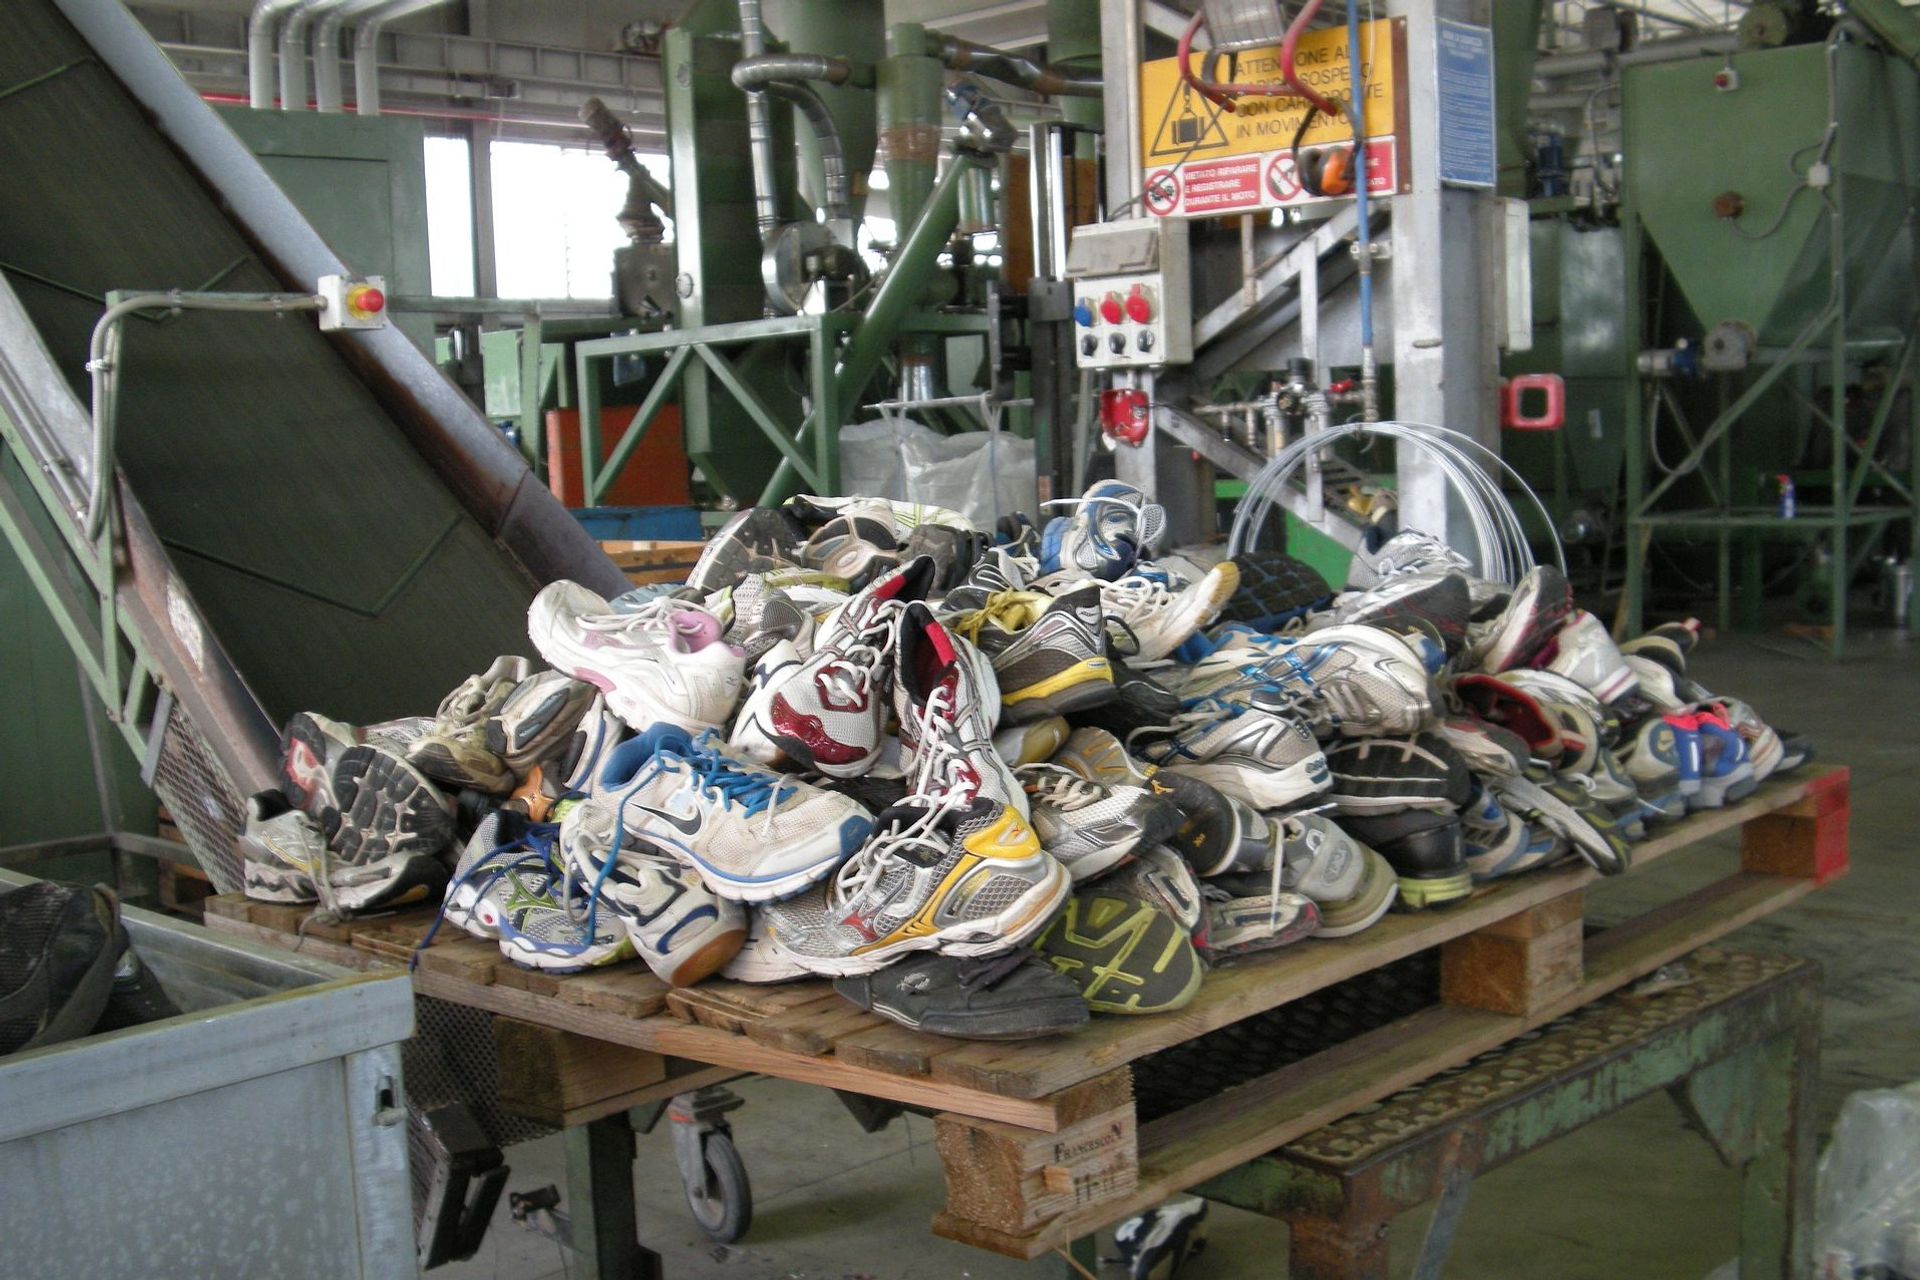 Sneakers intended for recovery to limit waste